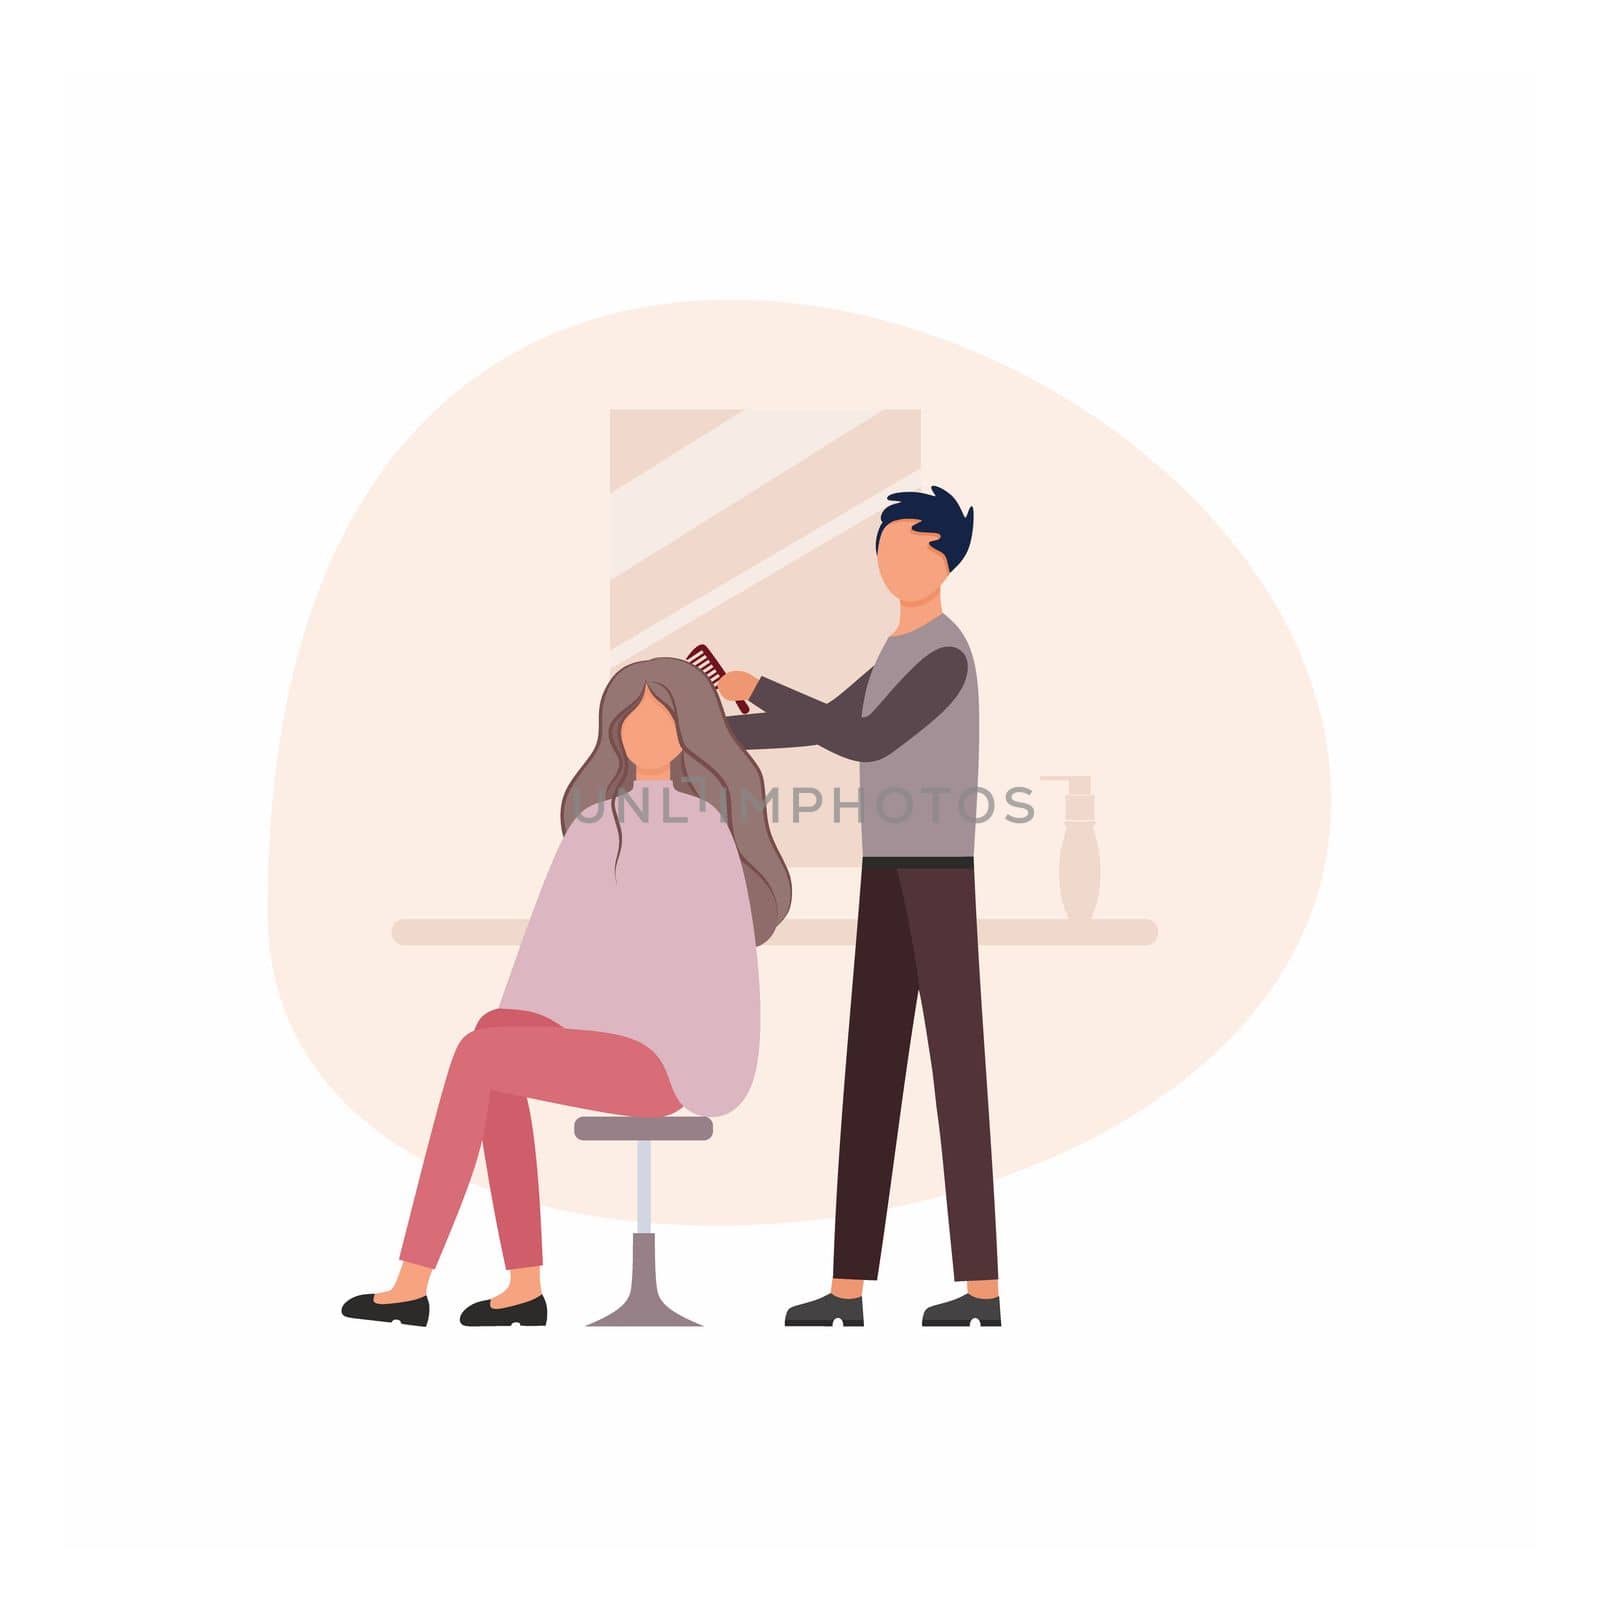 Barber a man does a girl's hair in a Barber shop next to the mirror. Concept of services of a hair salon, beauty salon, beauty Studio. Beauty and hair care, haircut. Vector flat cartoon illustration.